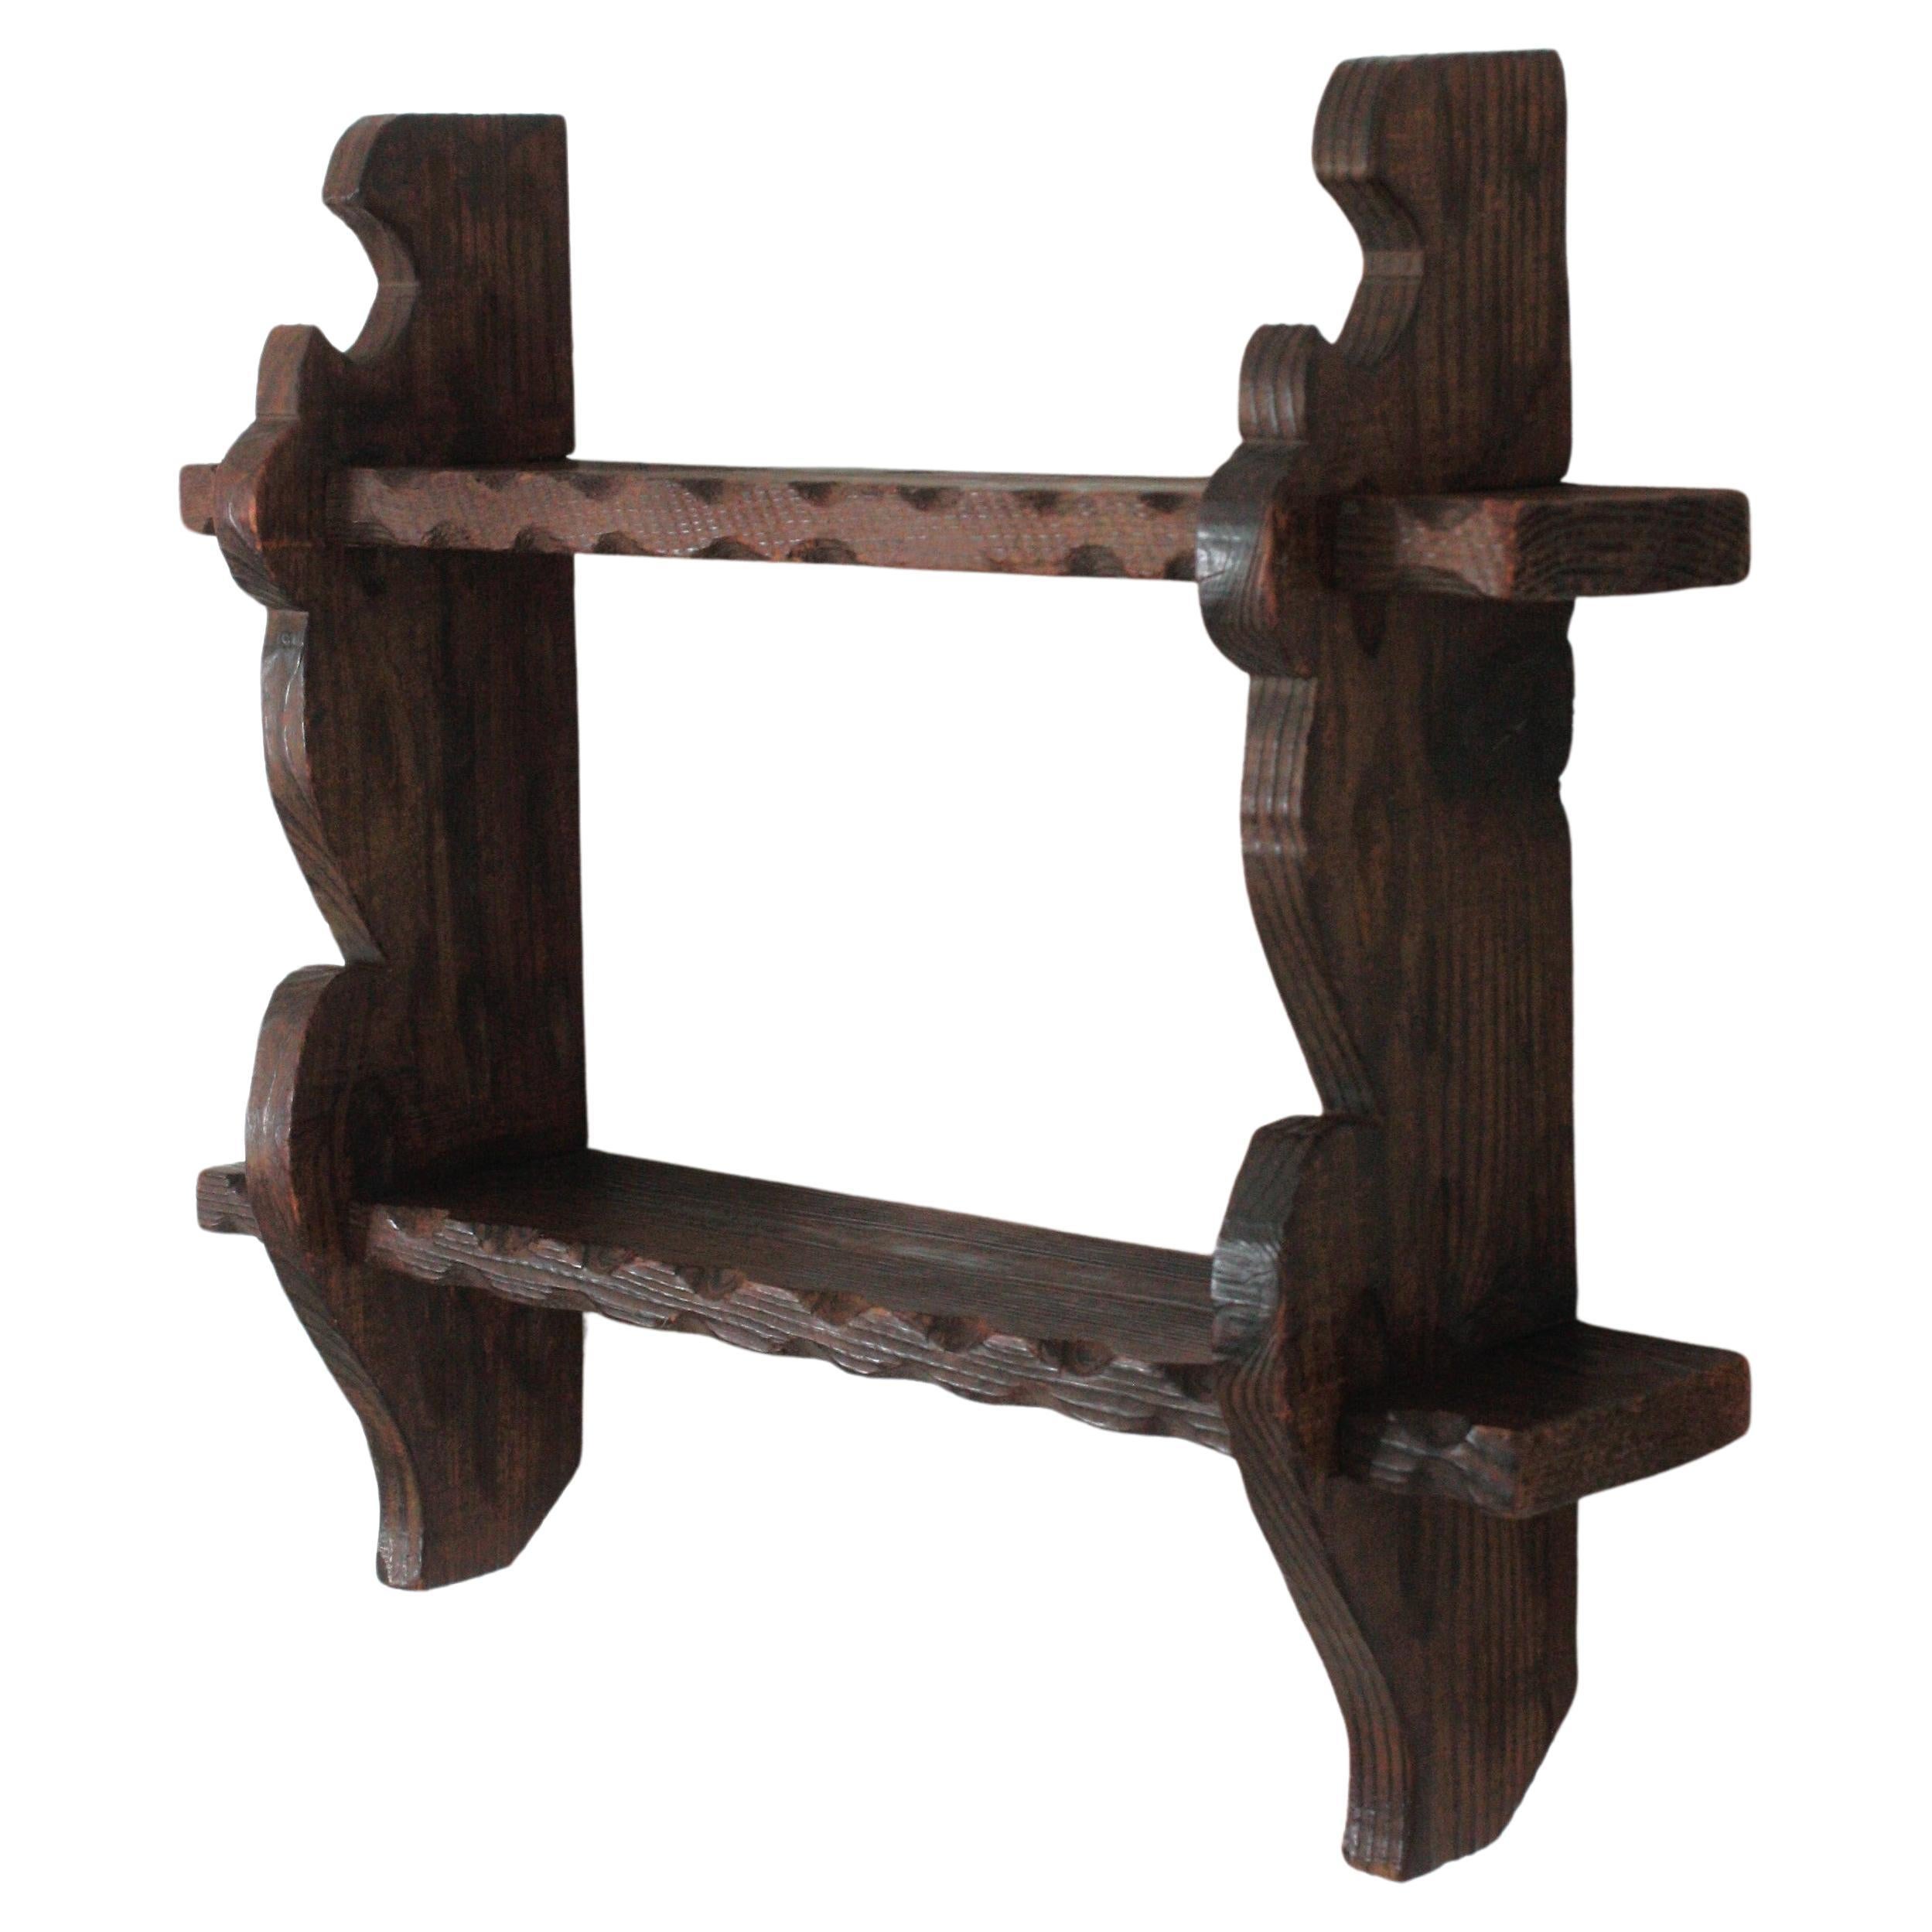 Spanish Colonial Wood Two Tier Spice Rack Wall Shelf, 1940s
Hand-carved pine spice rack or small wall shelf, Spain, 1940s-1950s
This spice rack shelf has scalloped and carved details and decorative iron nails
it has a rustic finish and Spanish